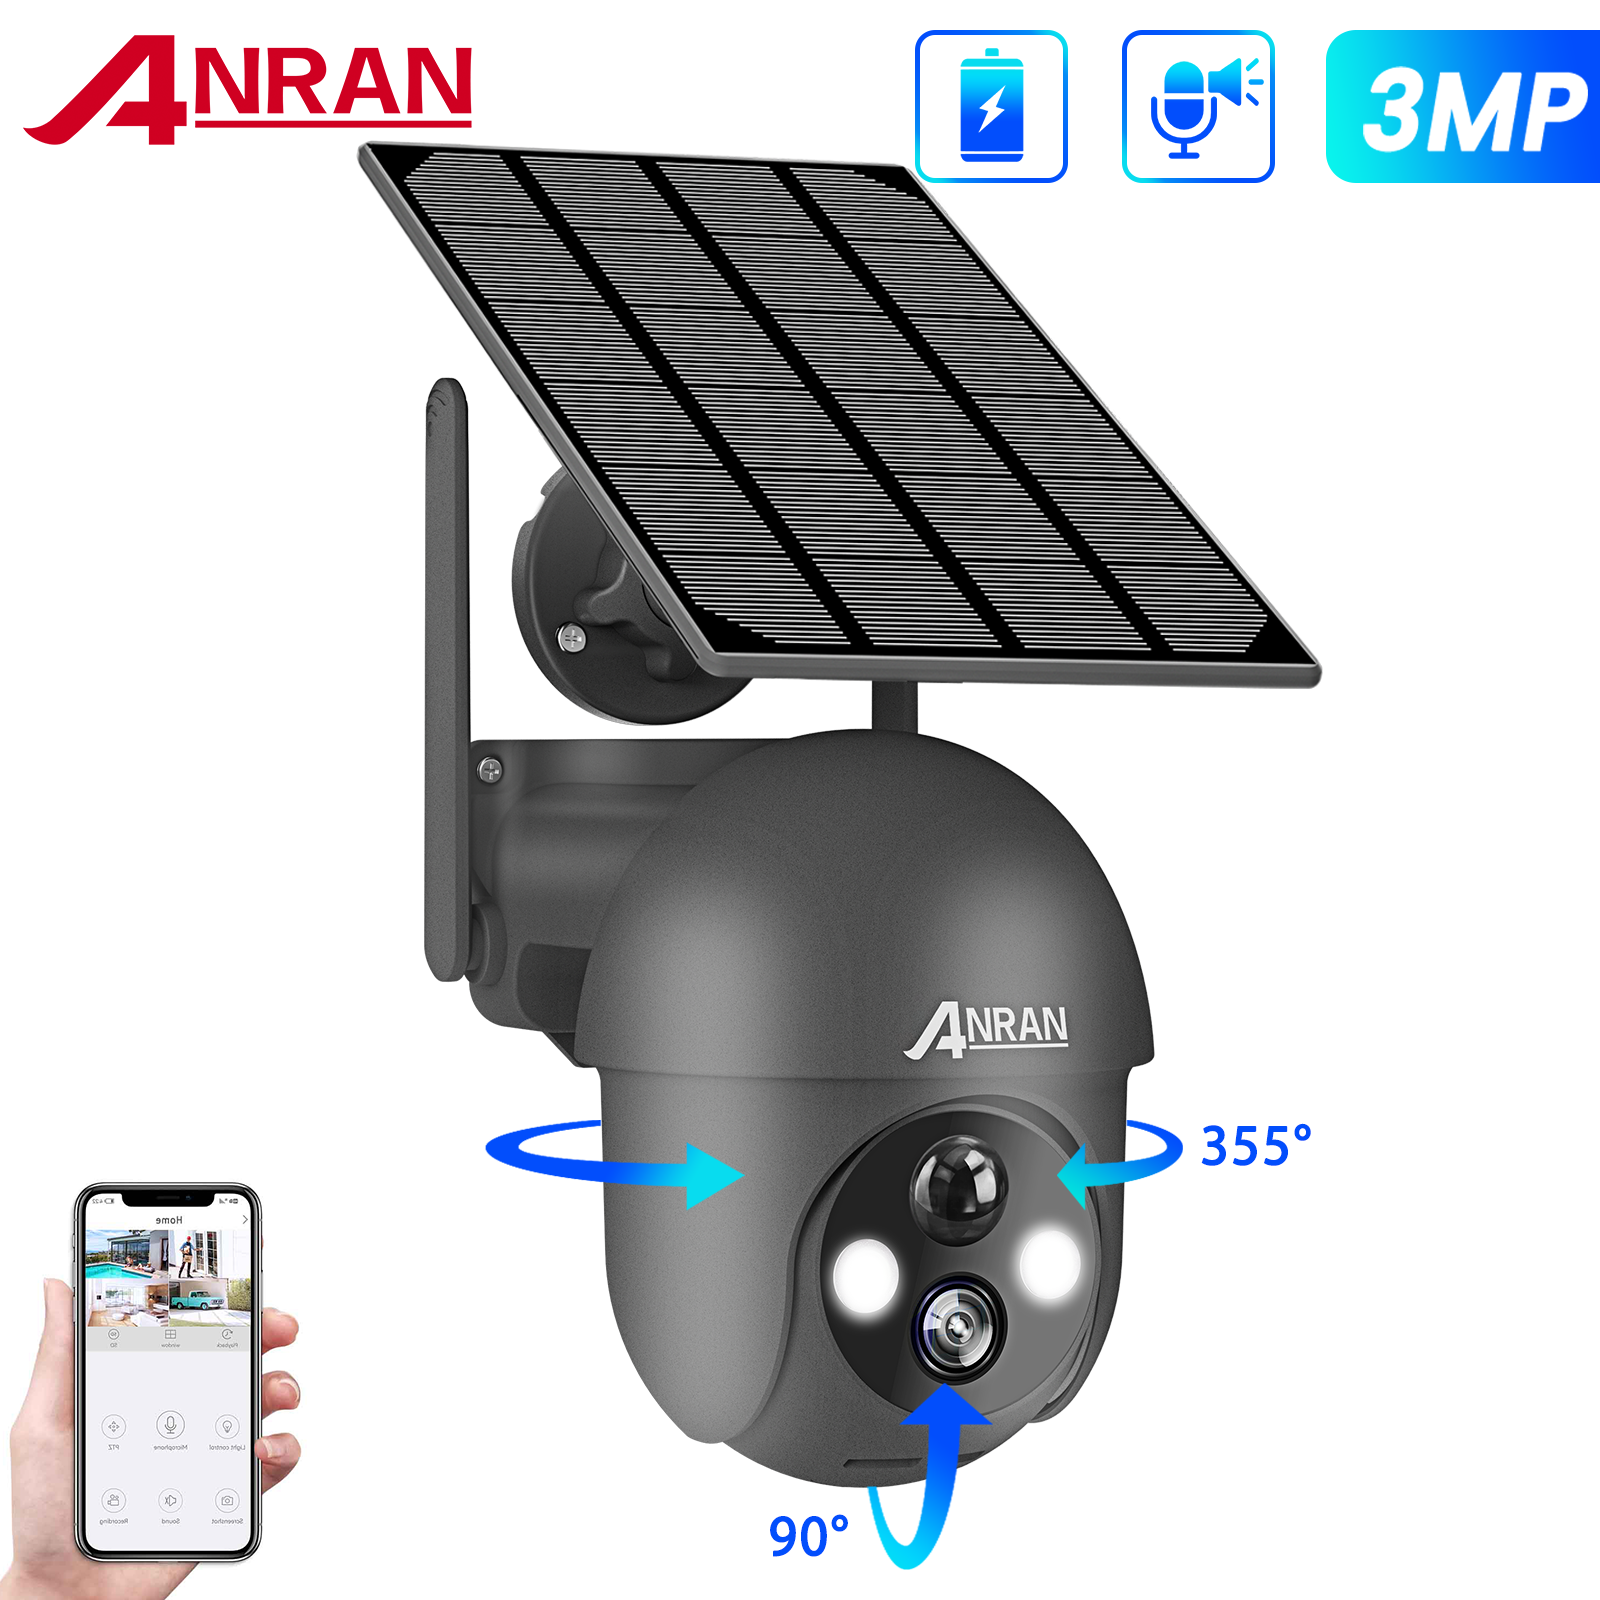 ANRAN Home Security Camera System Solar Panel 360°PTZ Wireless 3MP Outdoor Audio ANRAN AR-K04W1-36WB